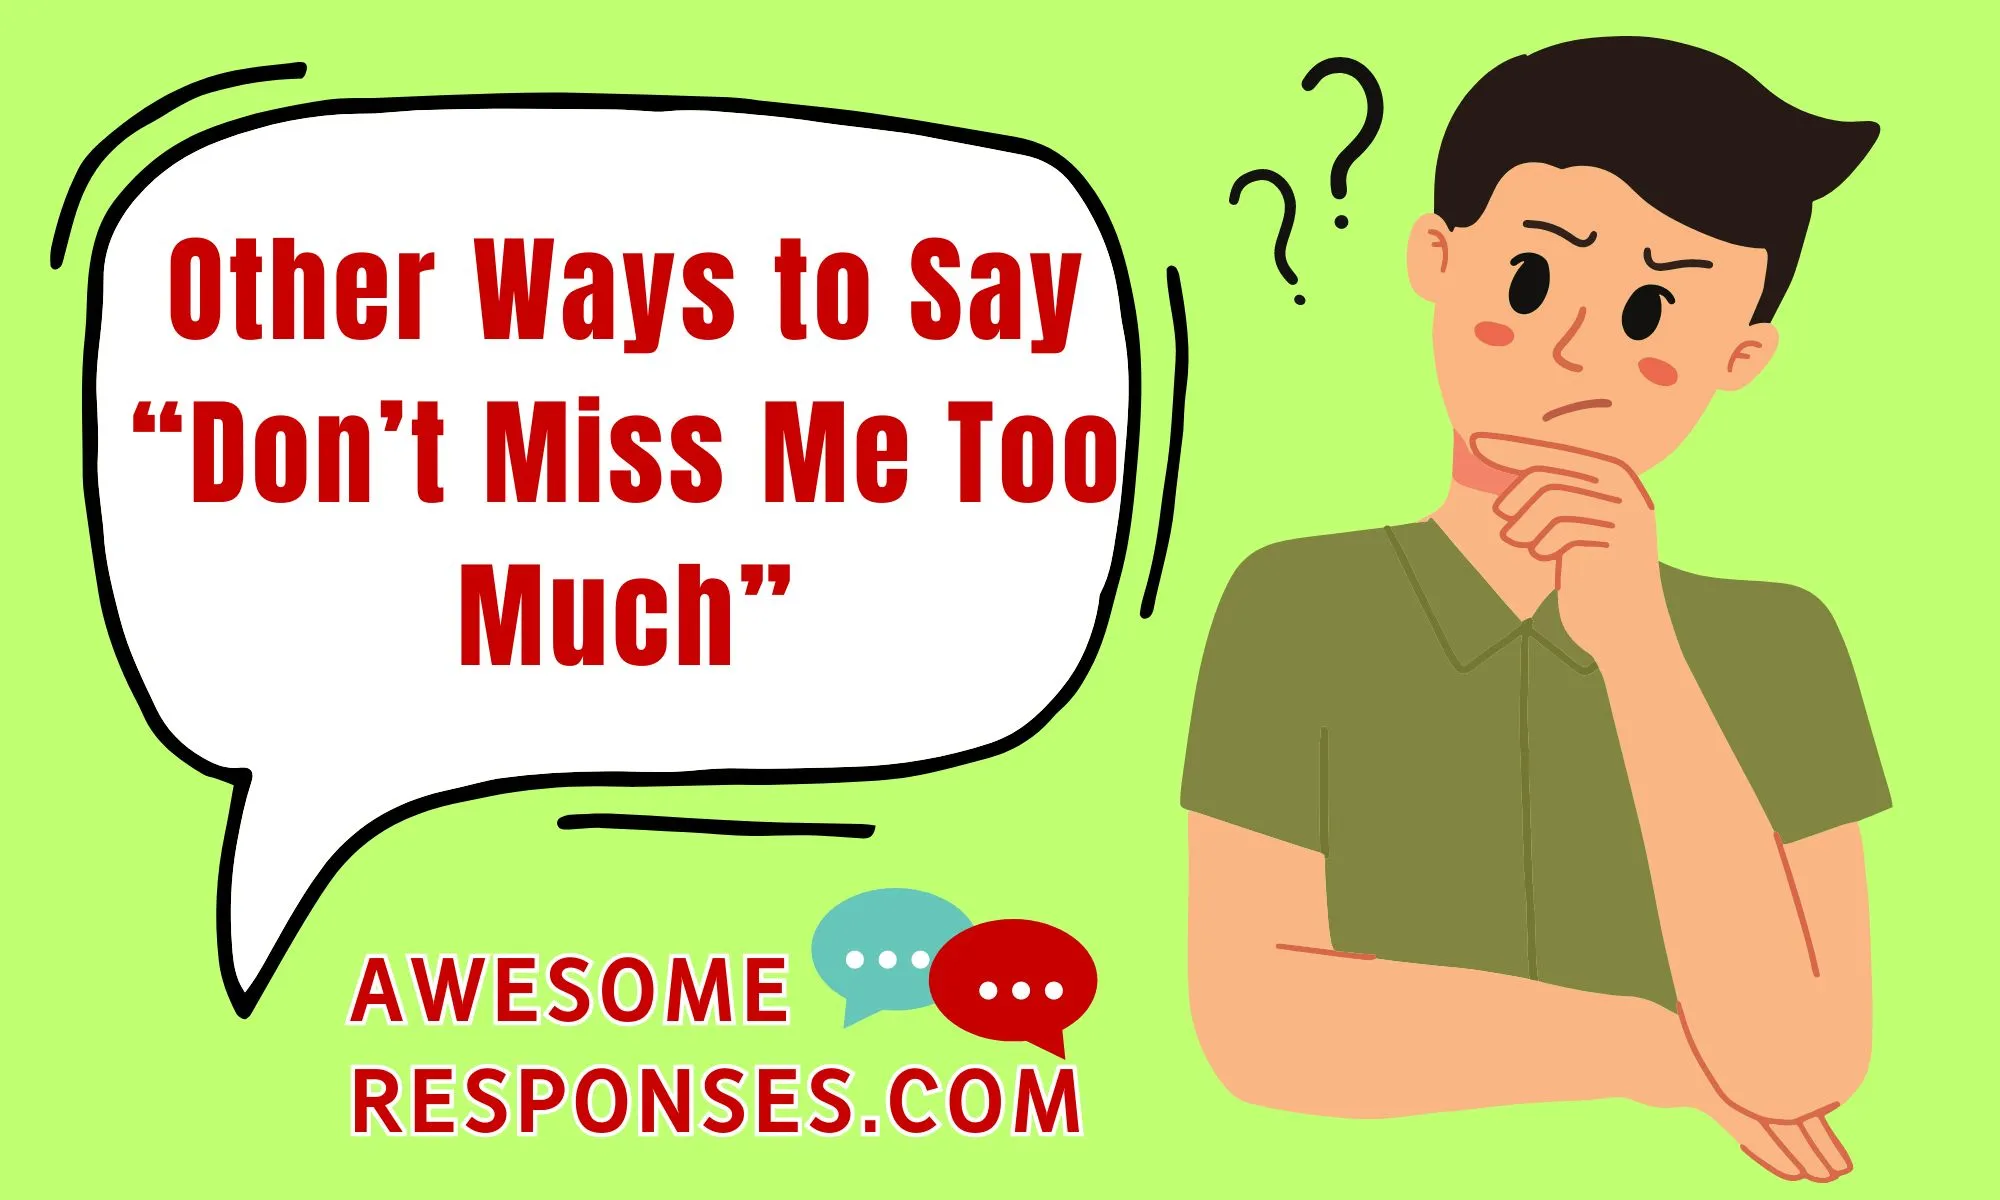 Other Ways to Say “Don’t Miss Me Too Much”